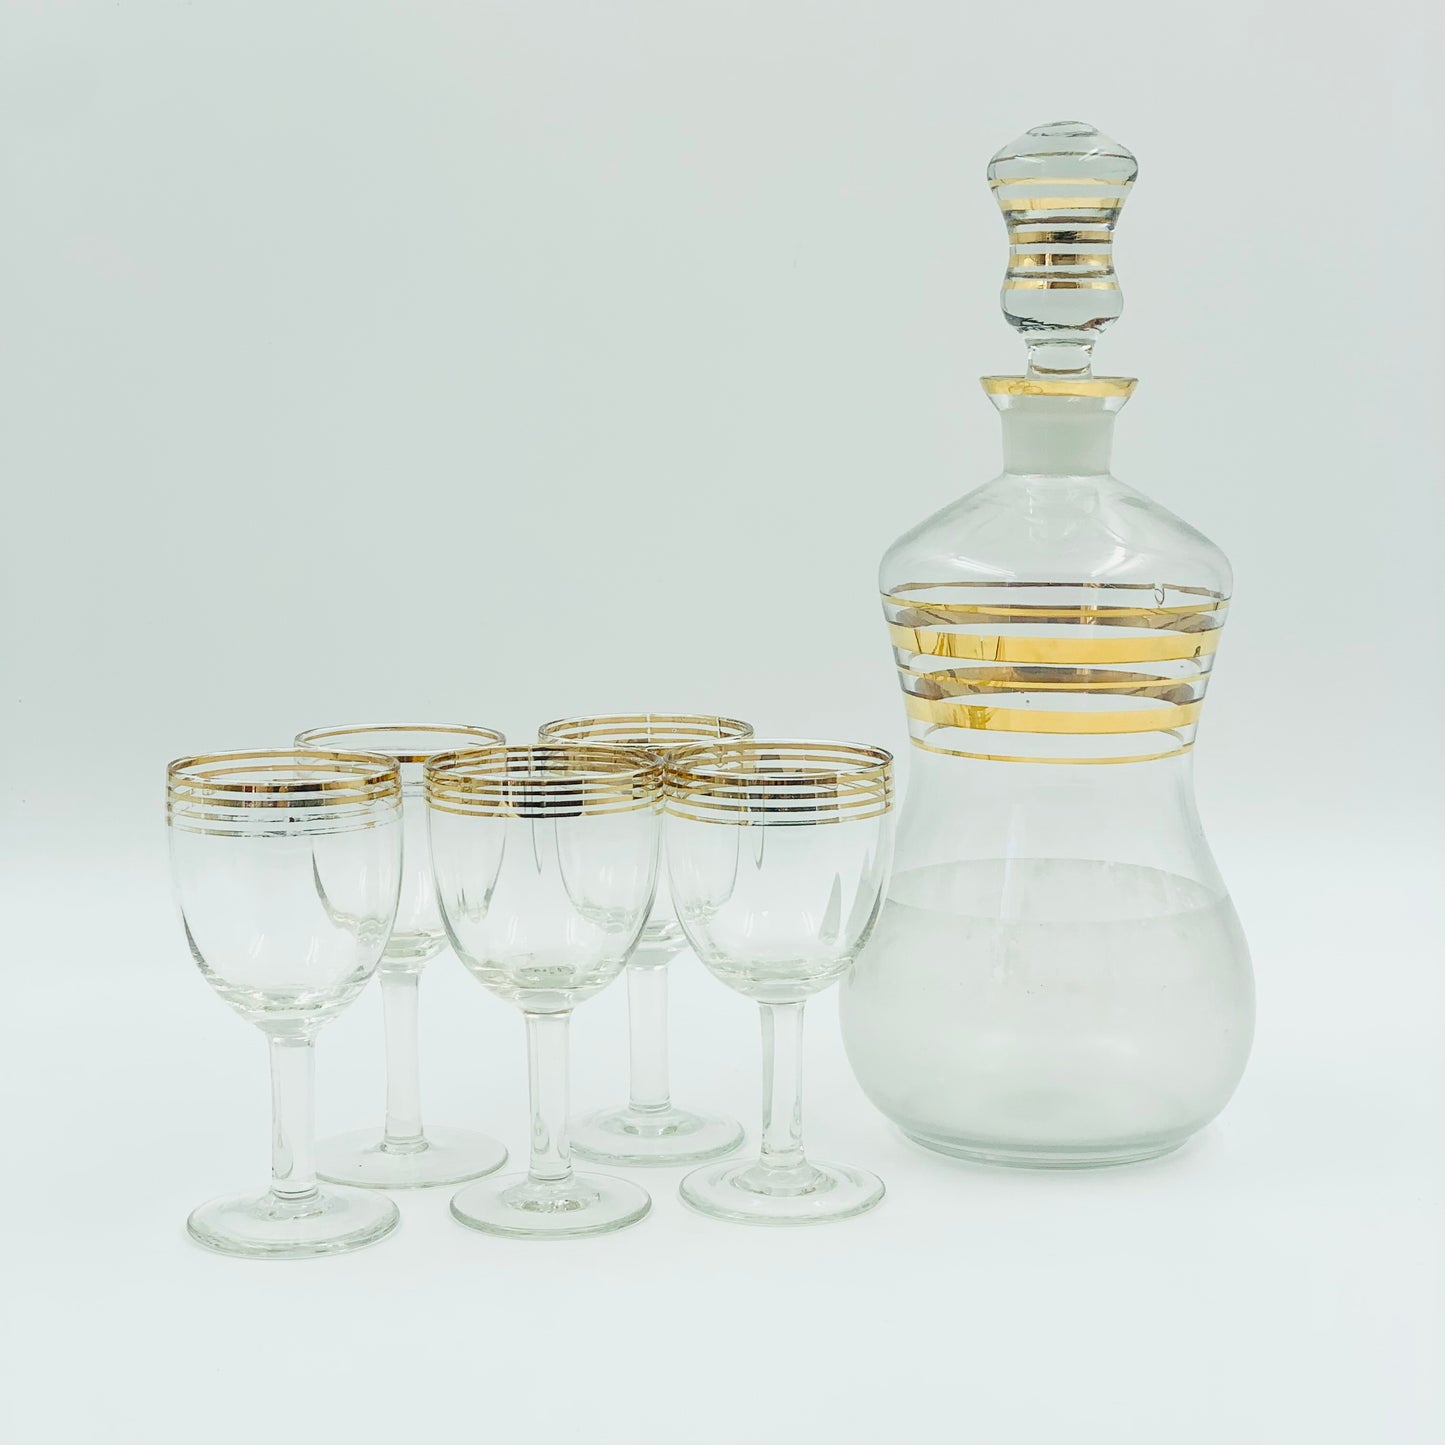 Midcentury decanter glass set with gold bands